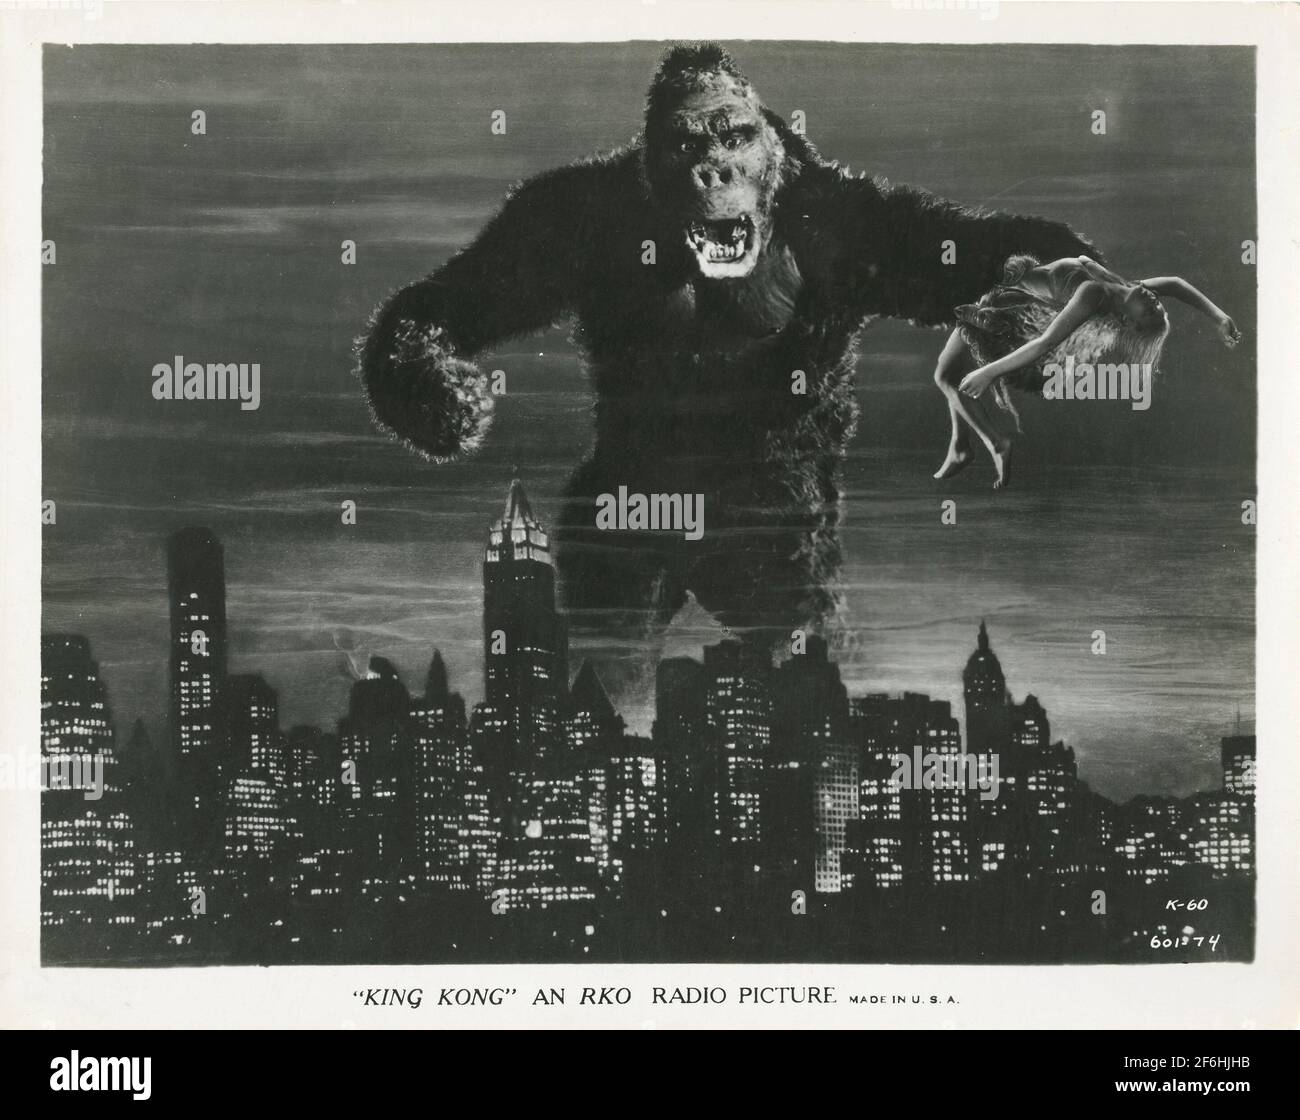 Classic King Kong, publicity photo 1933. Featuring Fay Wray, Bruce Cabot, Robert Armstrong, Frank Reicher. Adventure / Fantasy / Action / Romance. Stock Photo